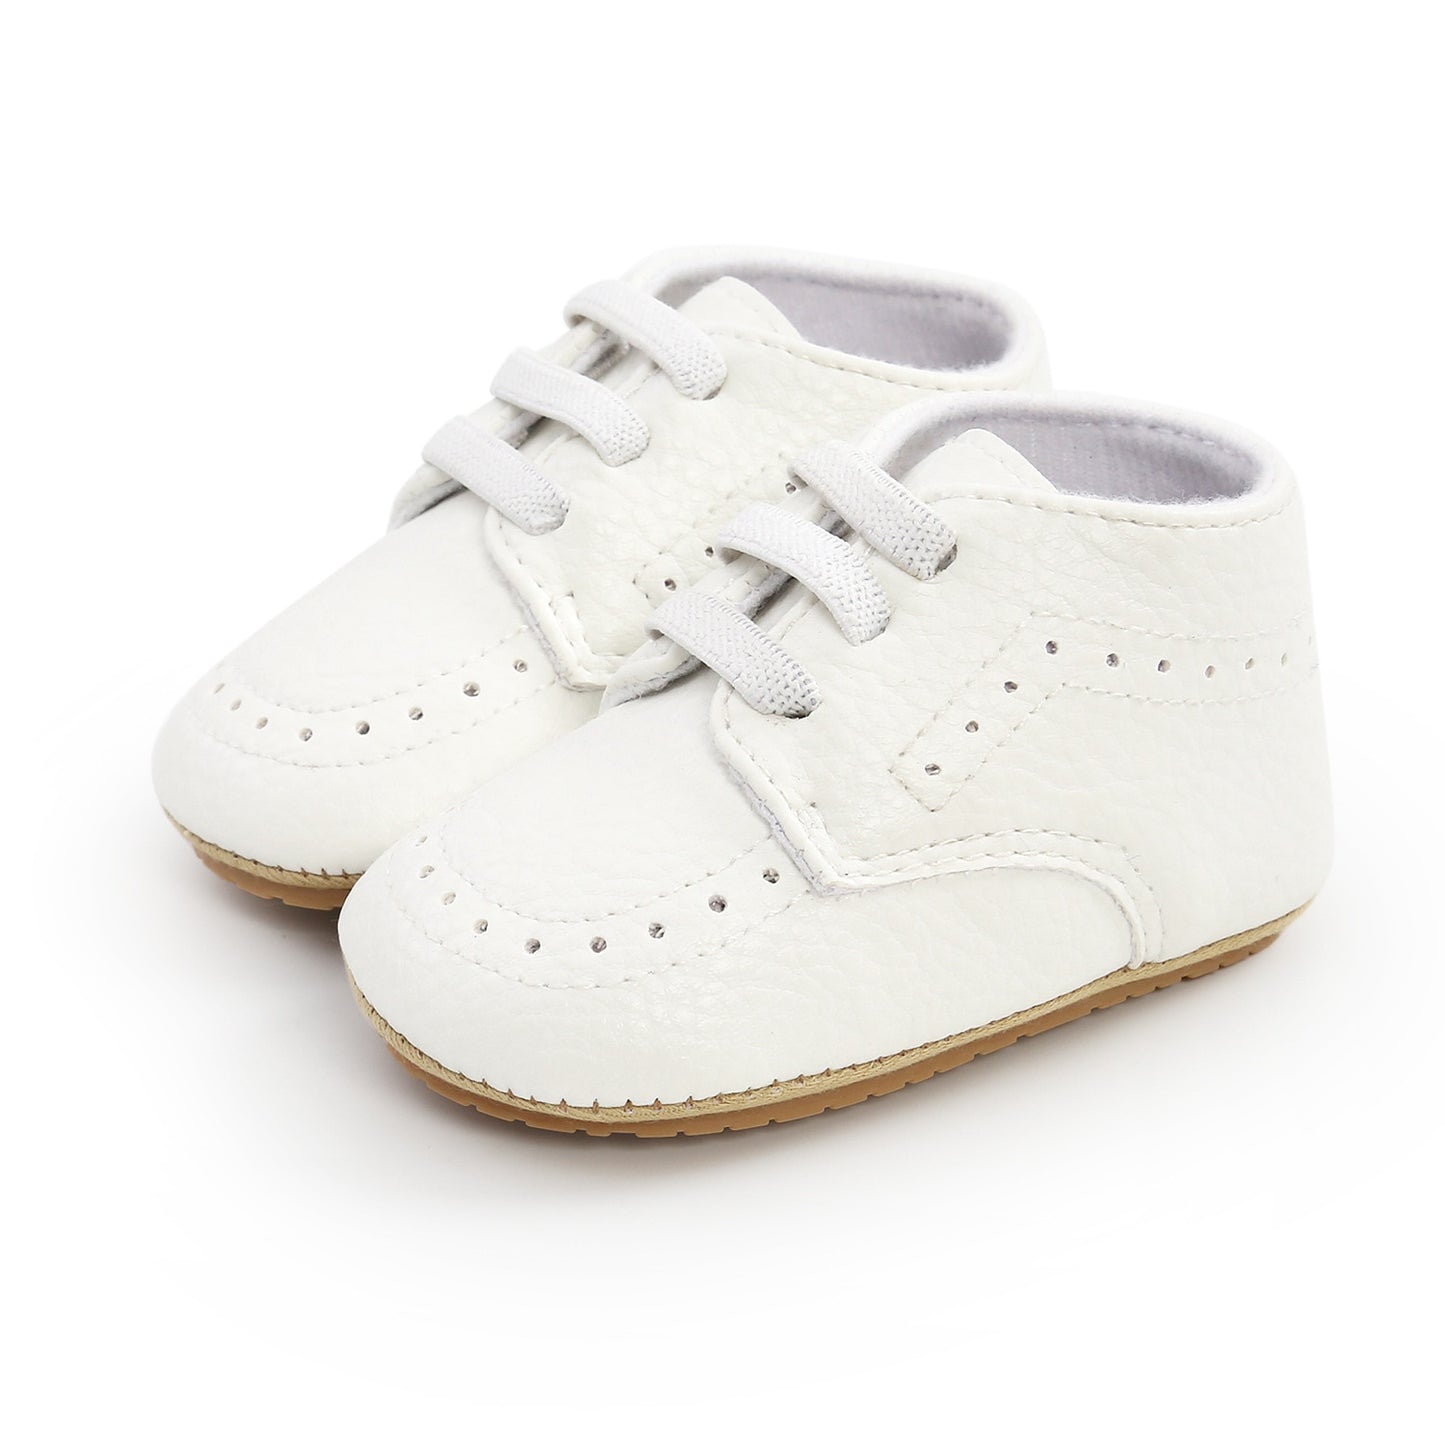 Baby/Toddler Shoes | Comfortable and Stylish Footwear for Little Ones itsykitschycoo